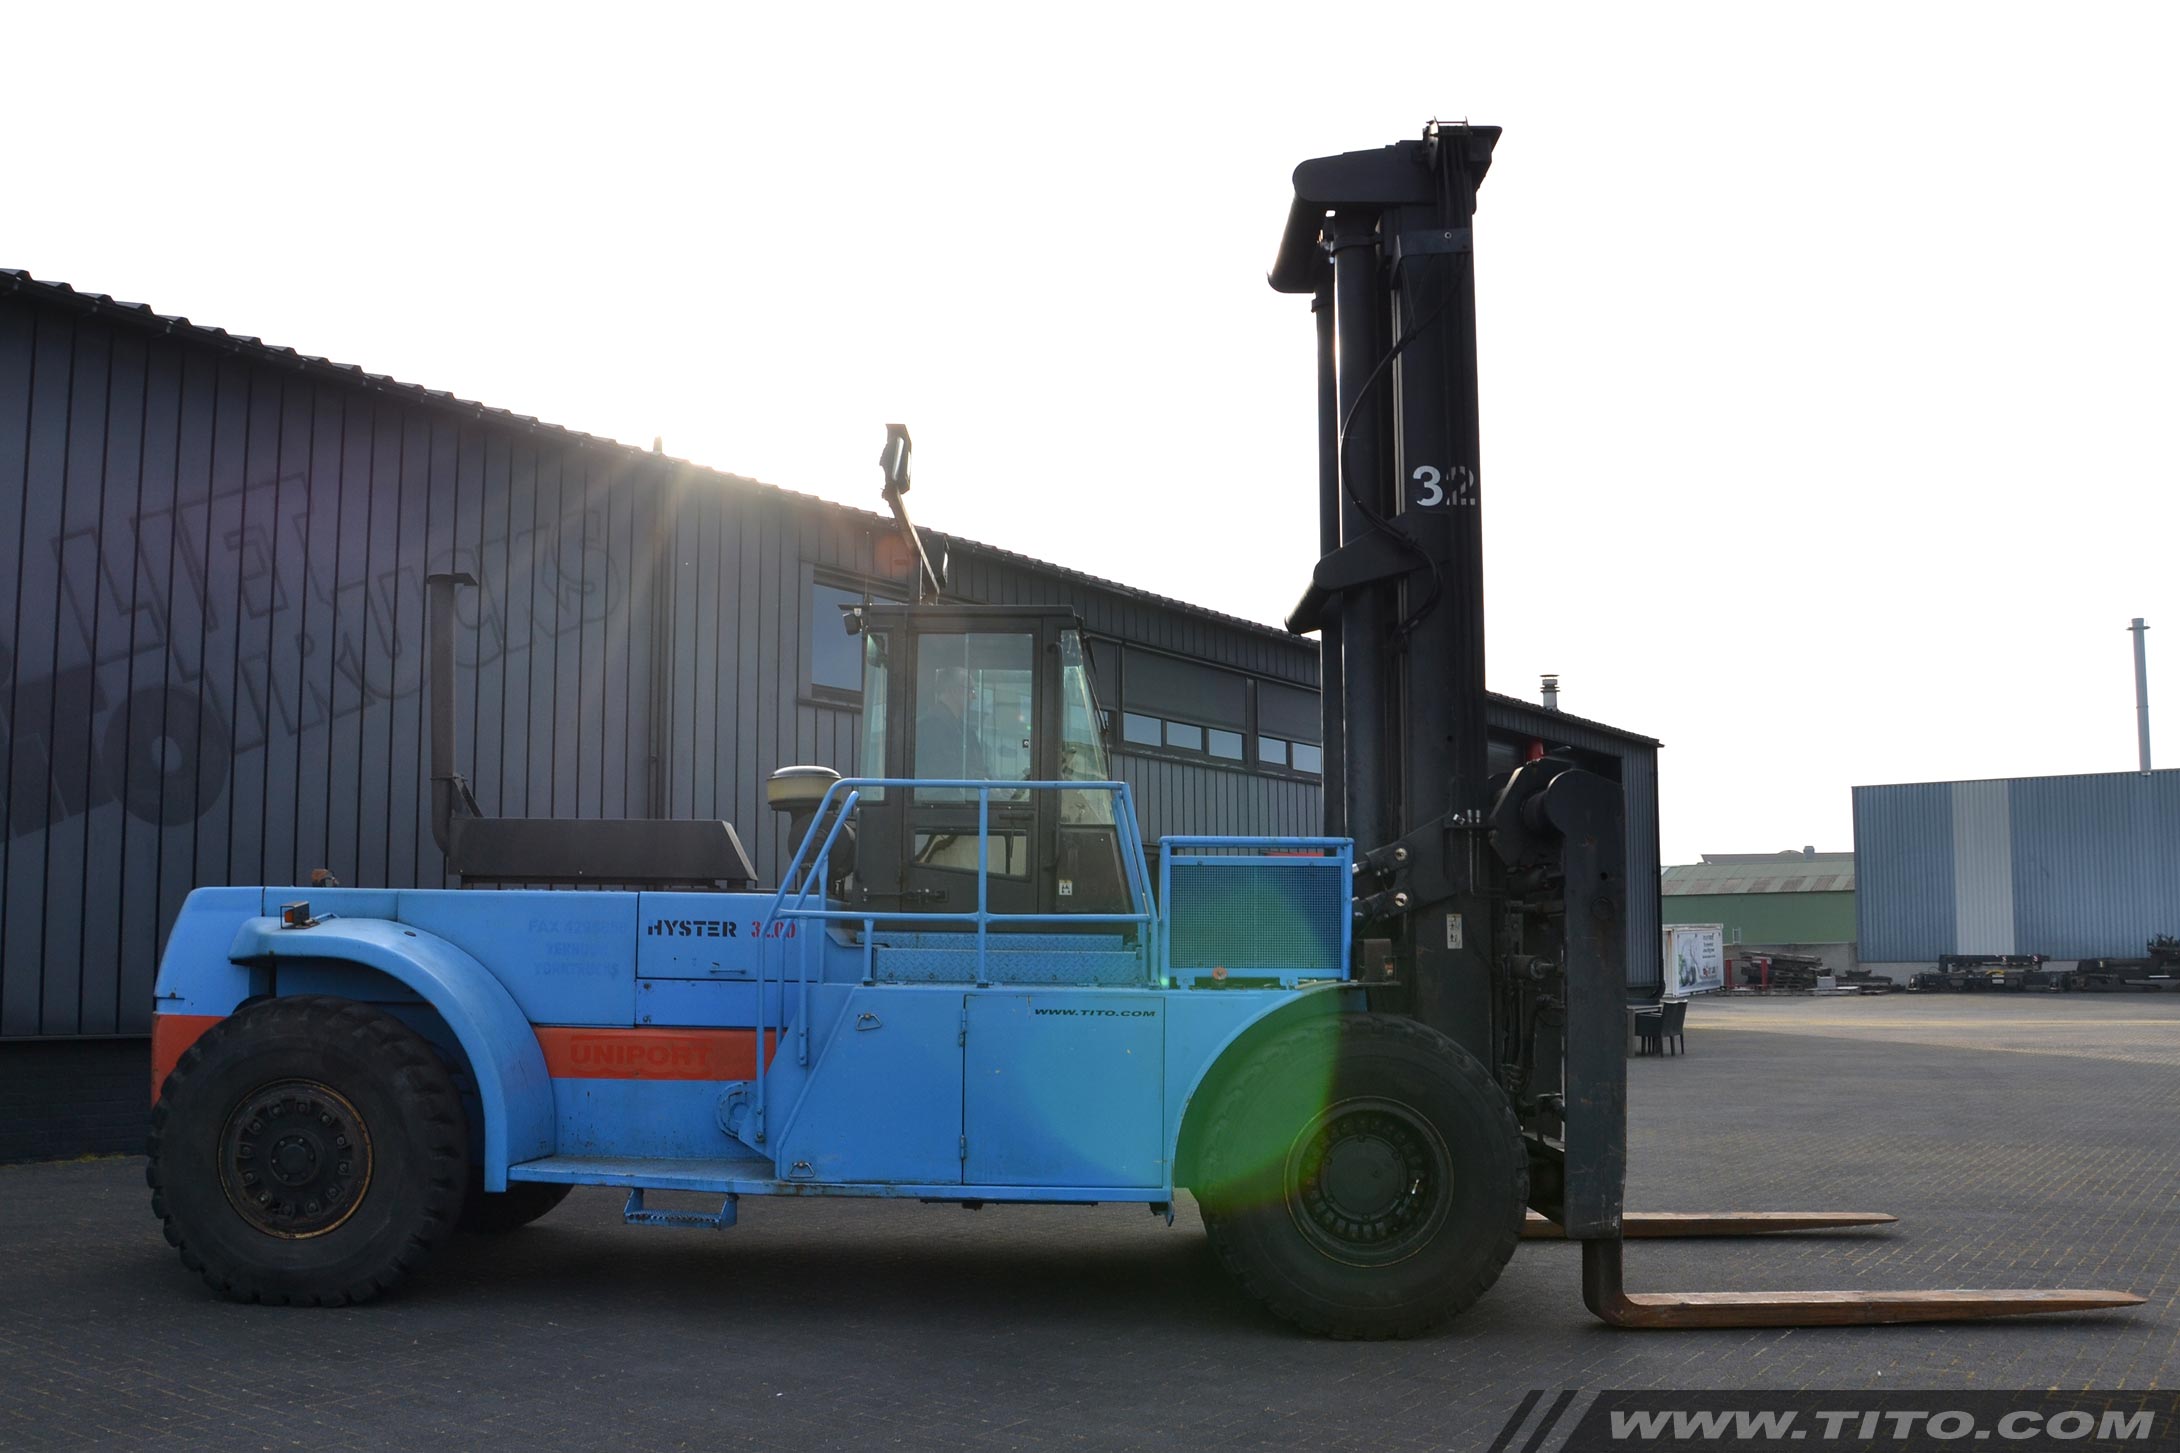 SOLD // used 32 ton Hyster forklift for sale